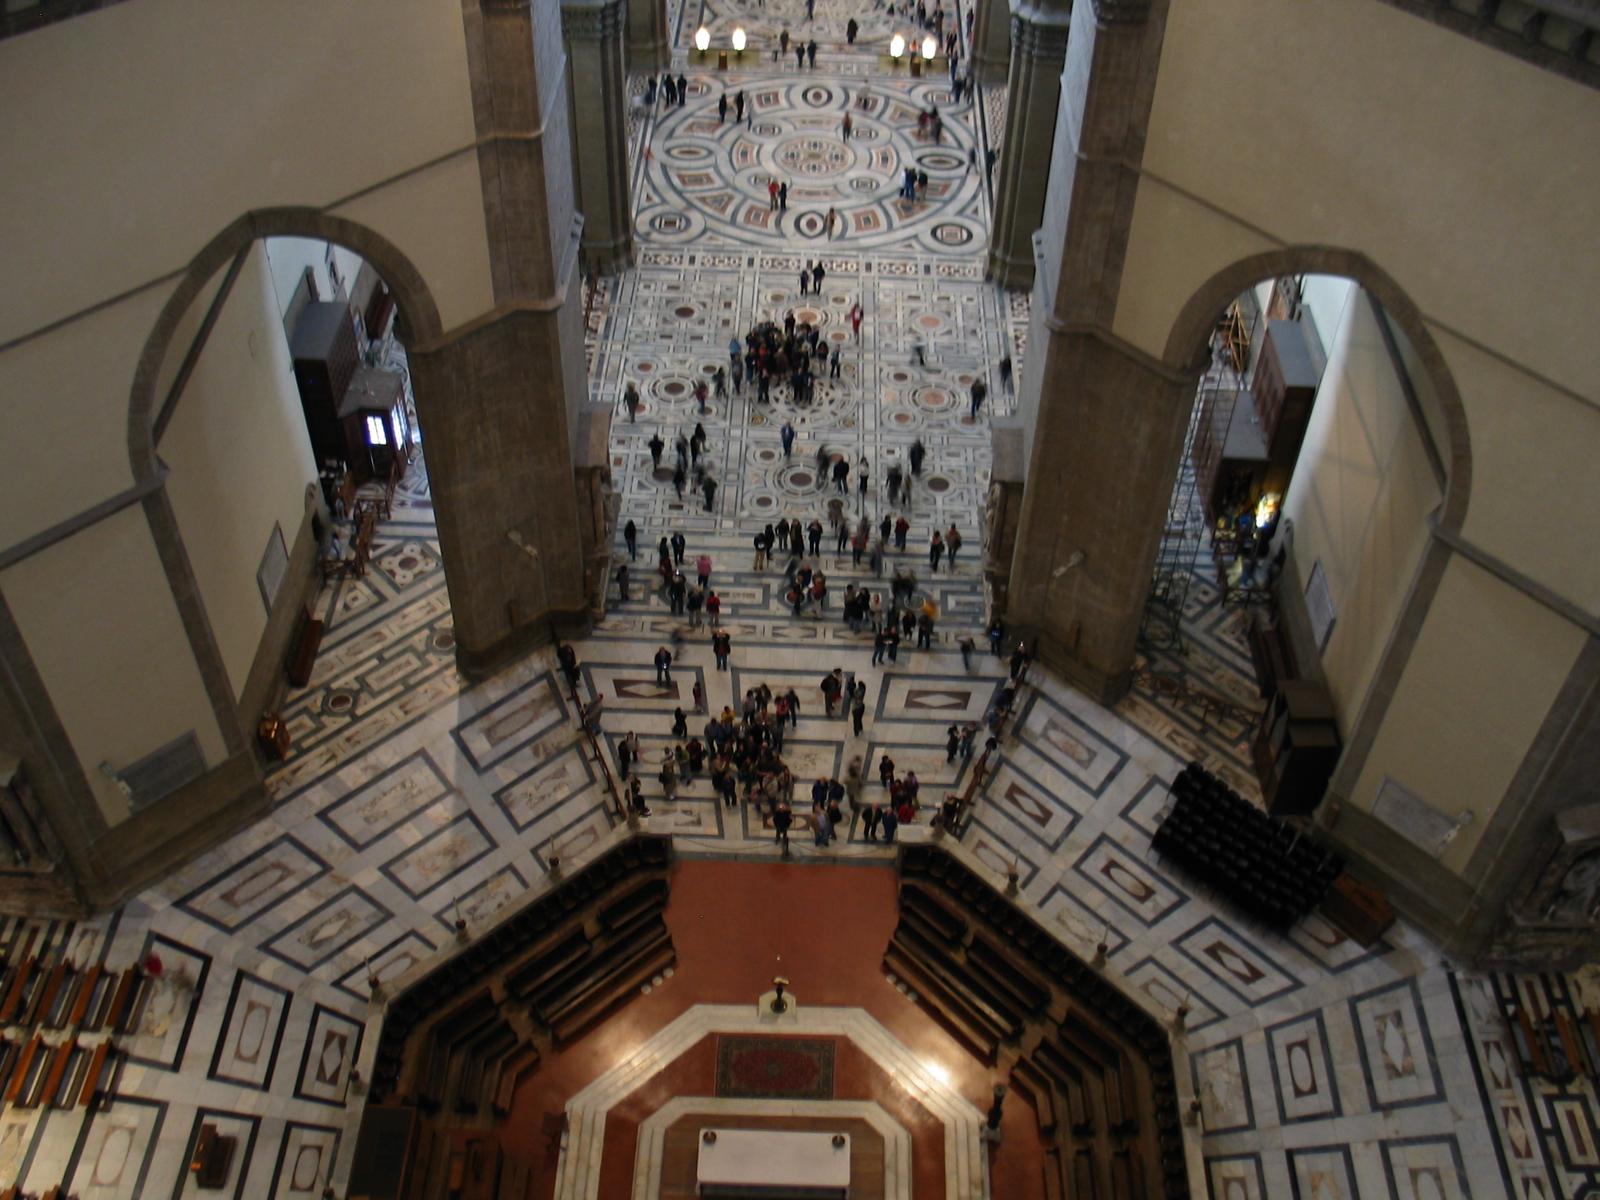 A bird's eye view of the inside of the Duomo